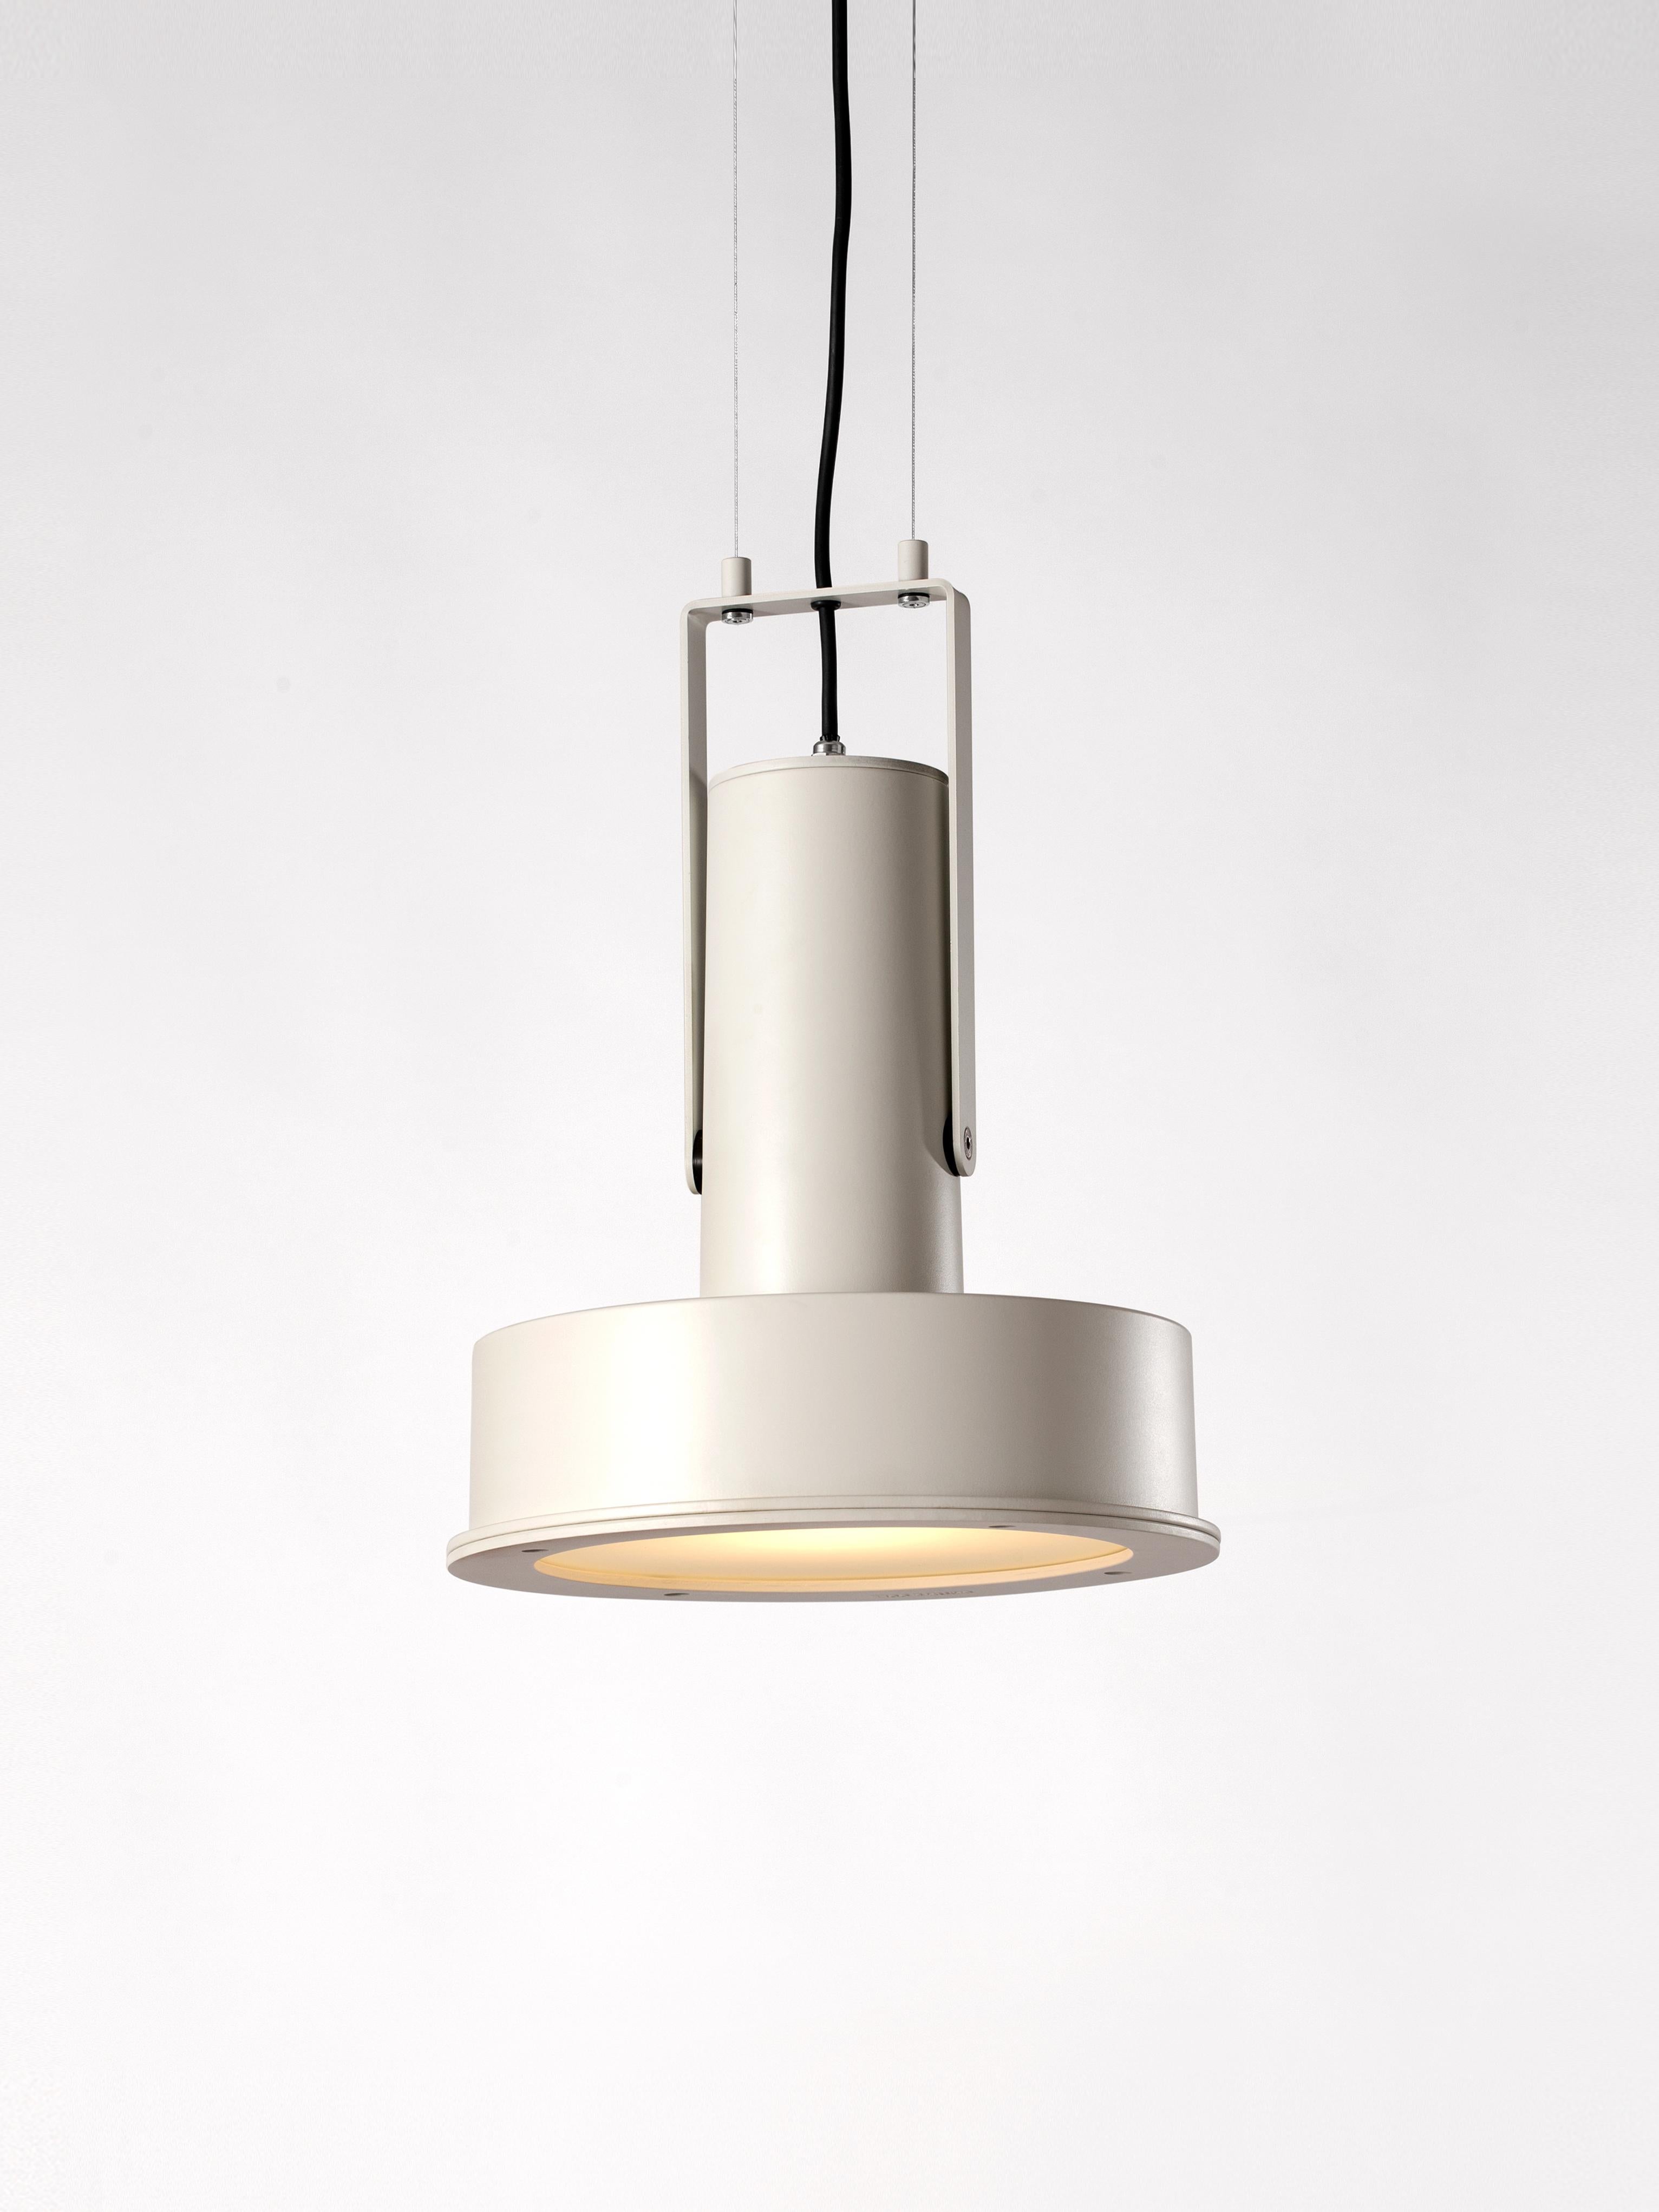 White Arne Domus pendant lamp by Santa & Cole
Dimensions: D 31 x H 440 cm
Materials: Metal, aluminum.
Available in other colors.

This elegant spotlight works both indoors and out. Its injected aluminium body and inner LED technology ensure